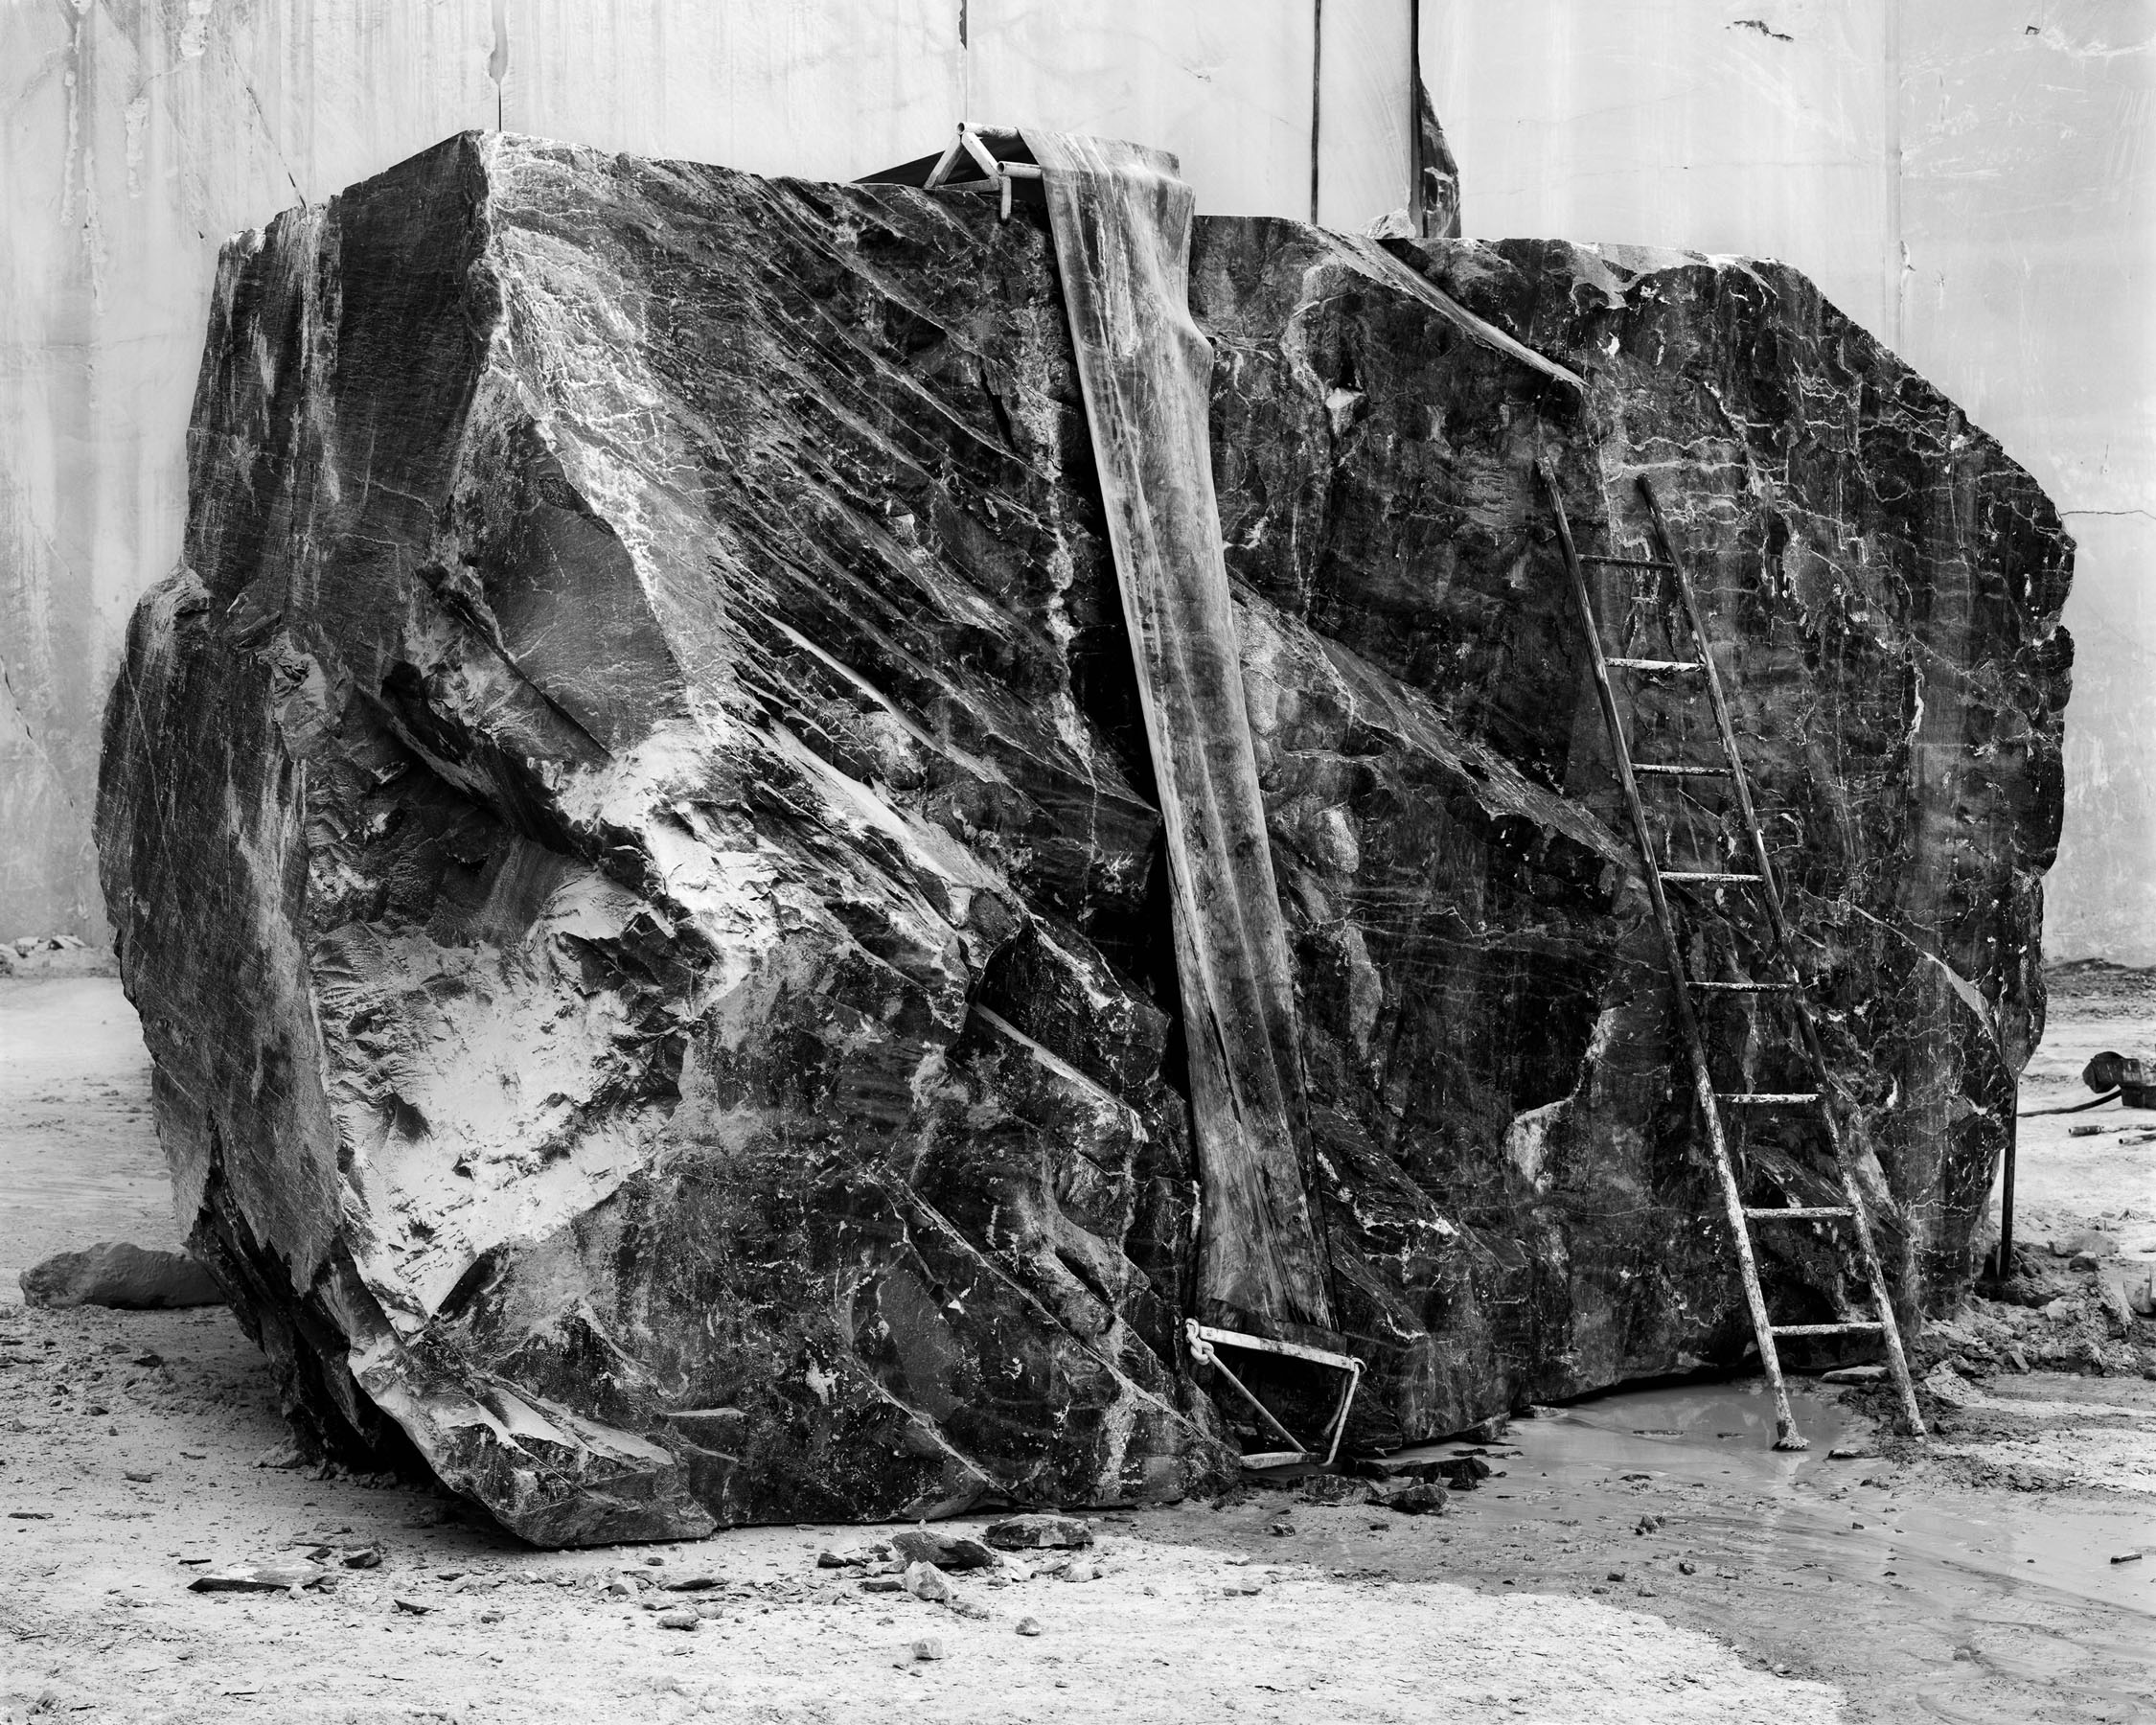 Big boulder with a ladder leaning against it